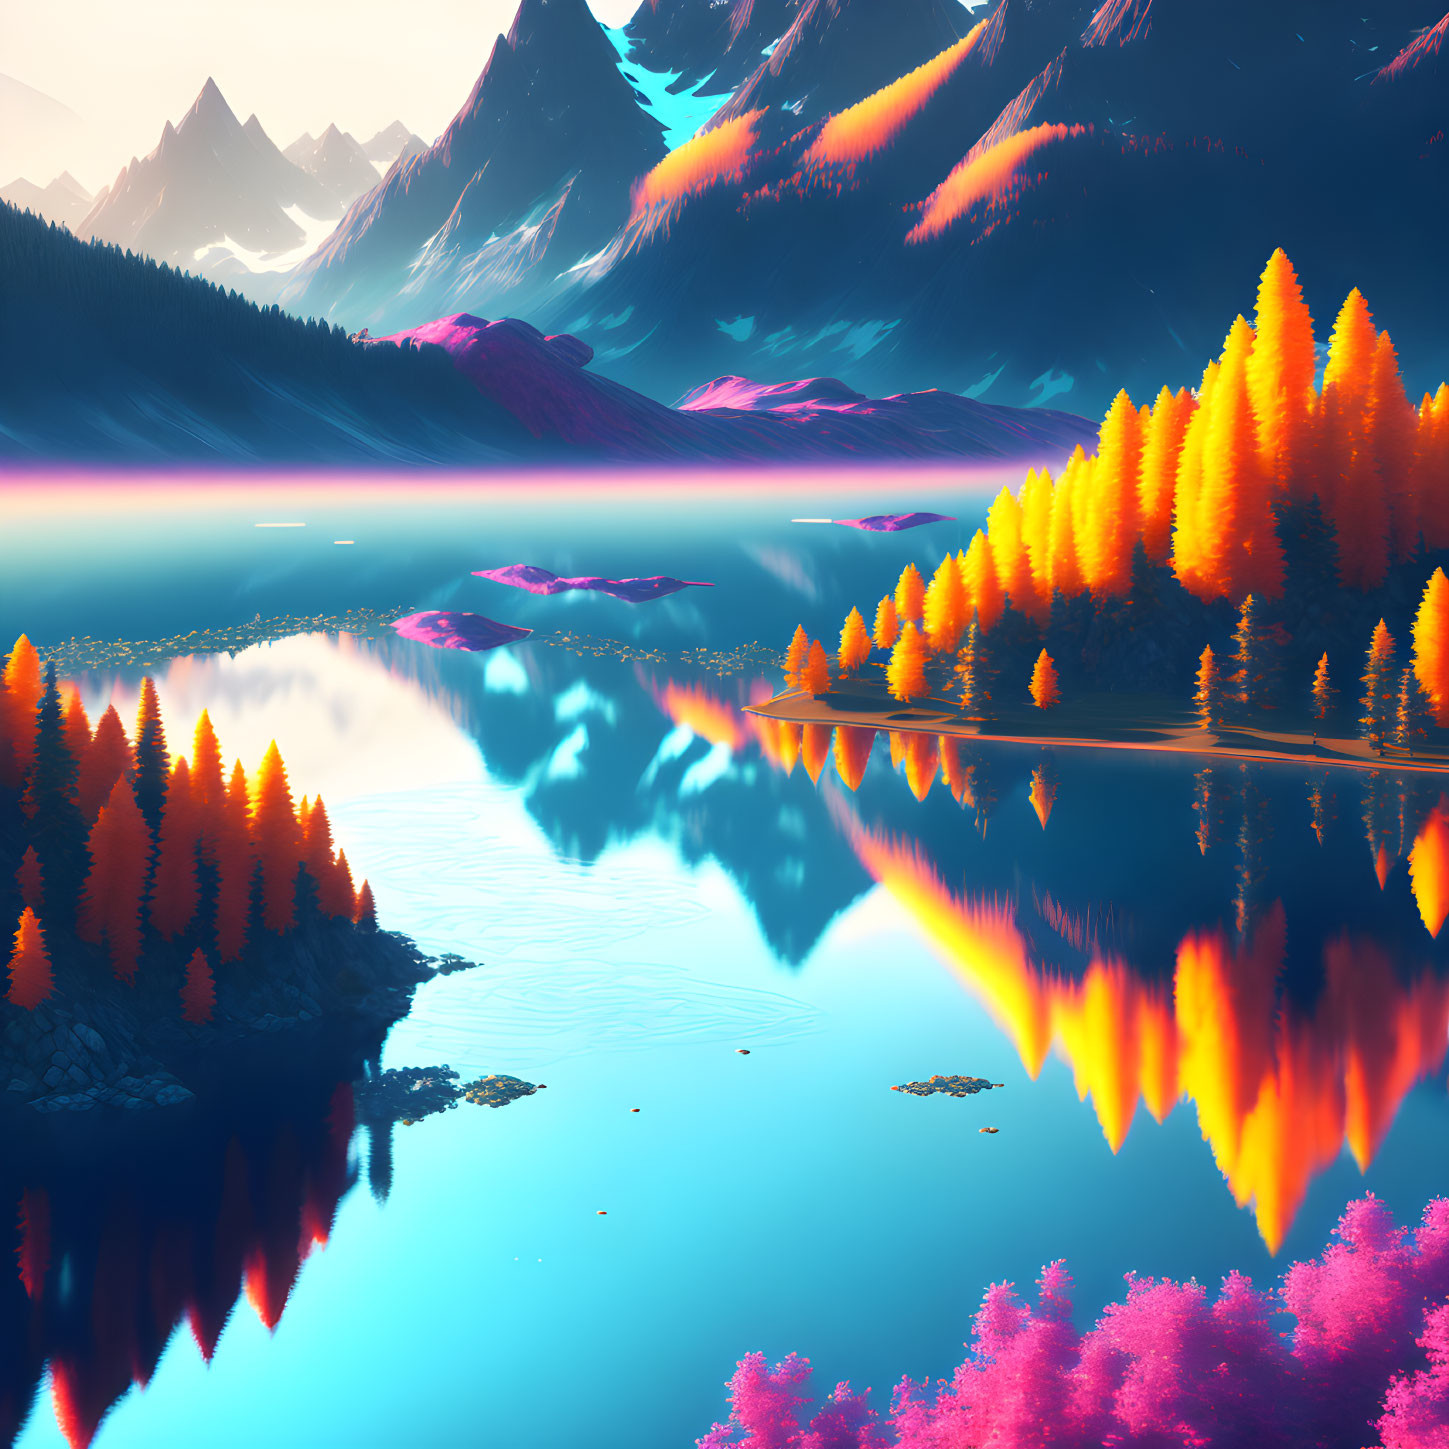 Colorful Surreal Landscape with Trees, Lake, Mountains, and Aurora